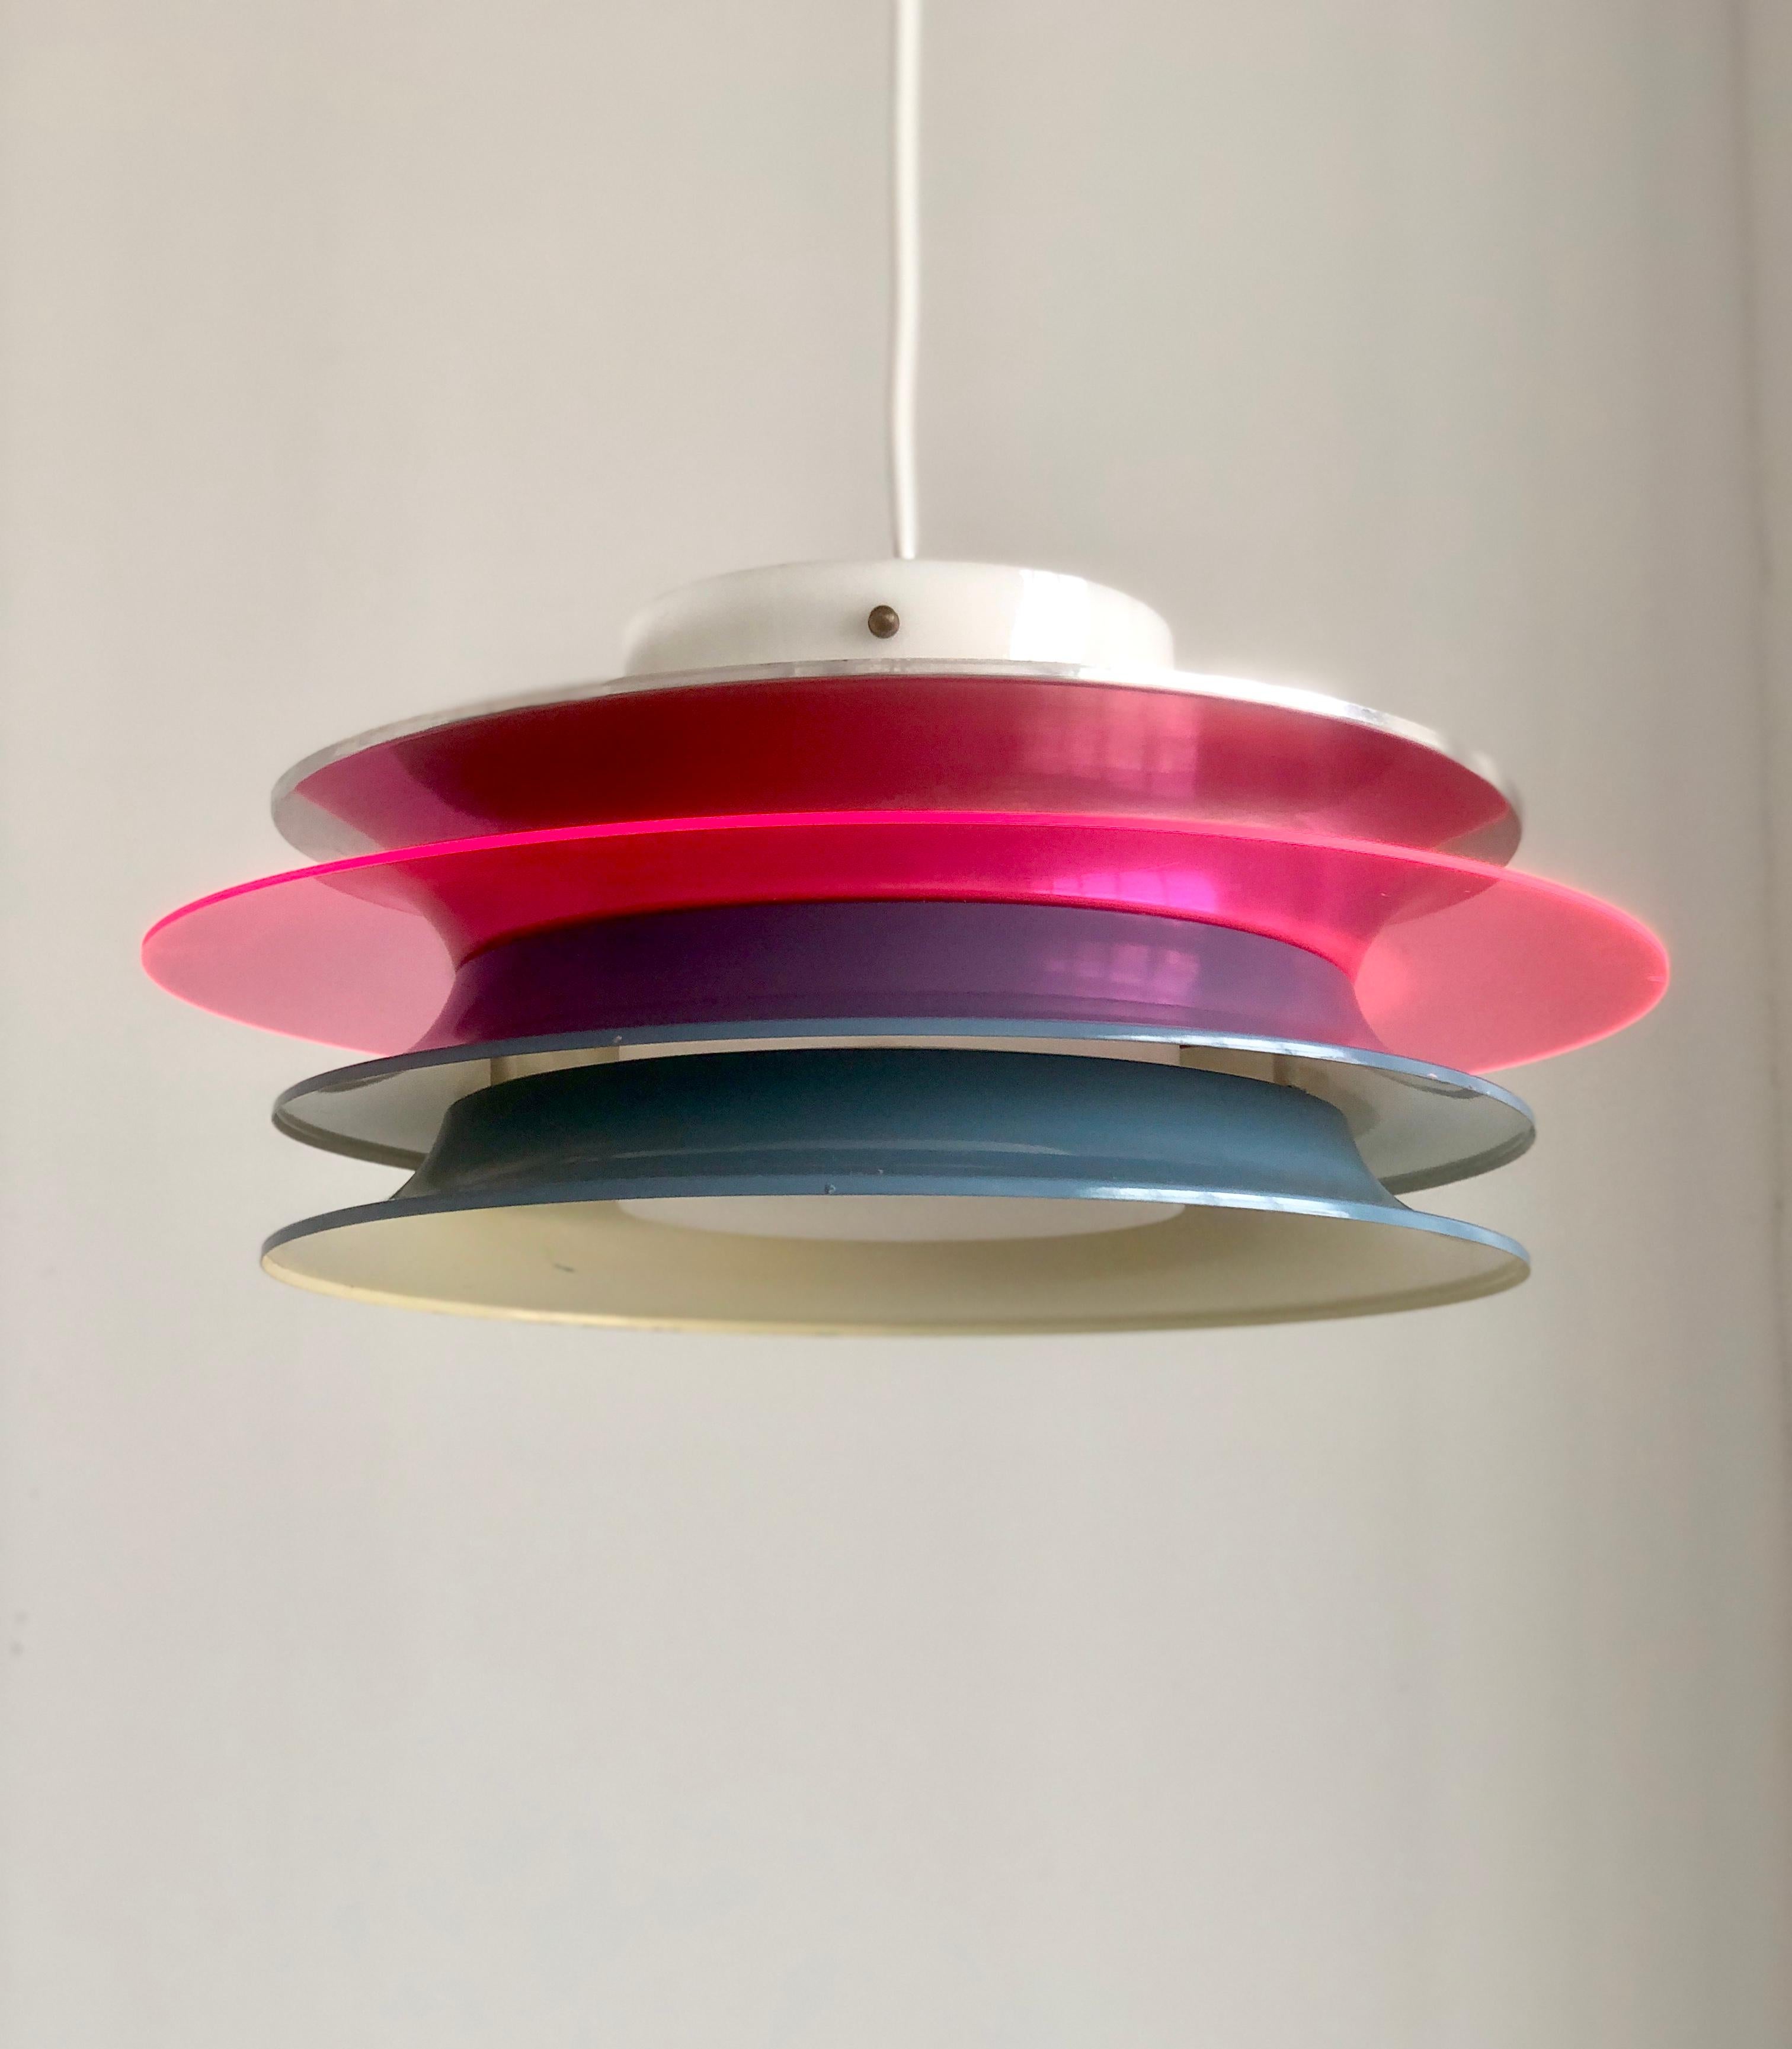 The multicolor ceiling lamps designed by Kai Ruokonen ( Kai Finnmark ) for Lynx, Stamped 